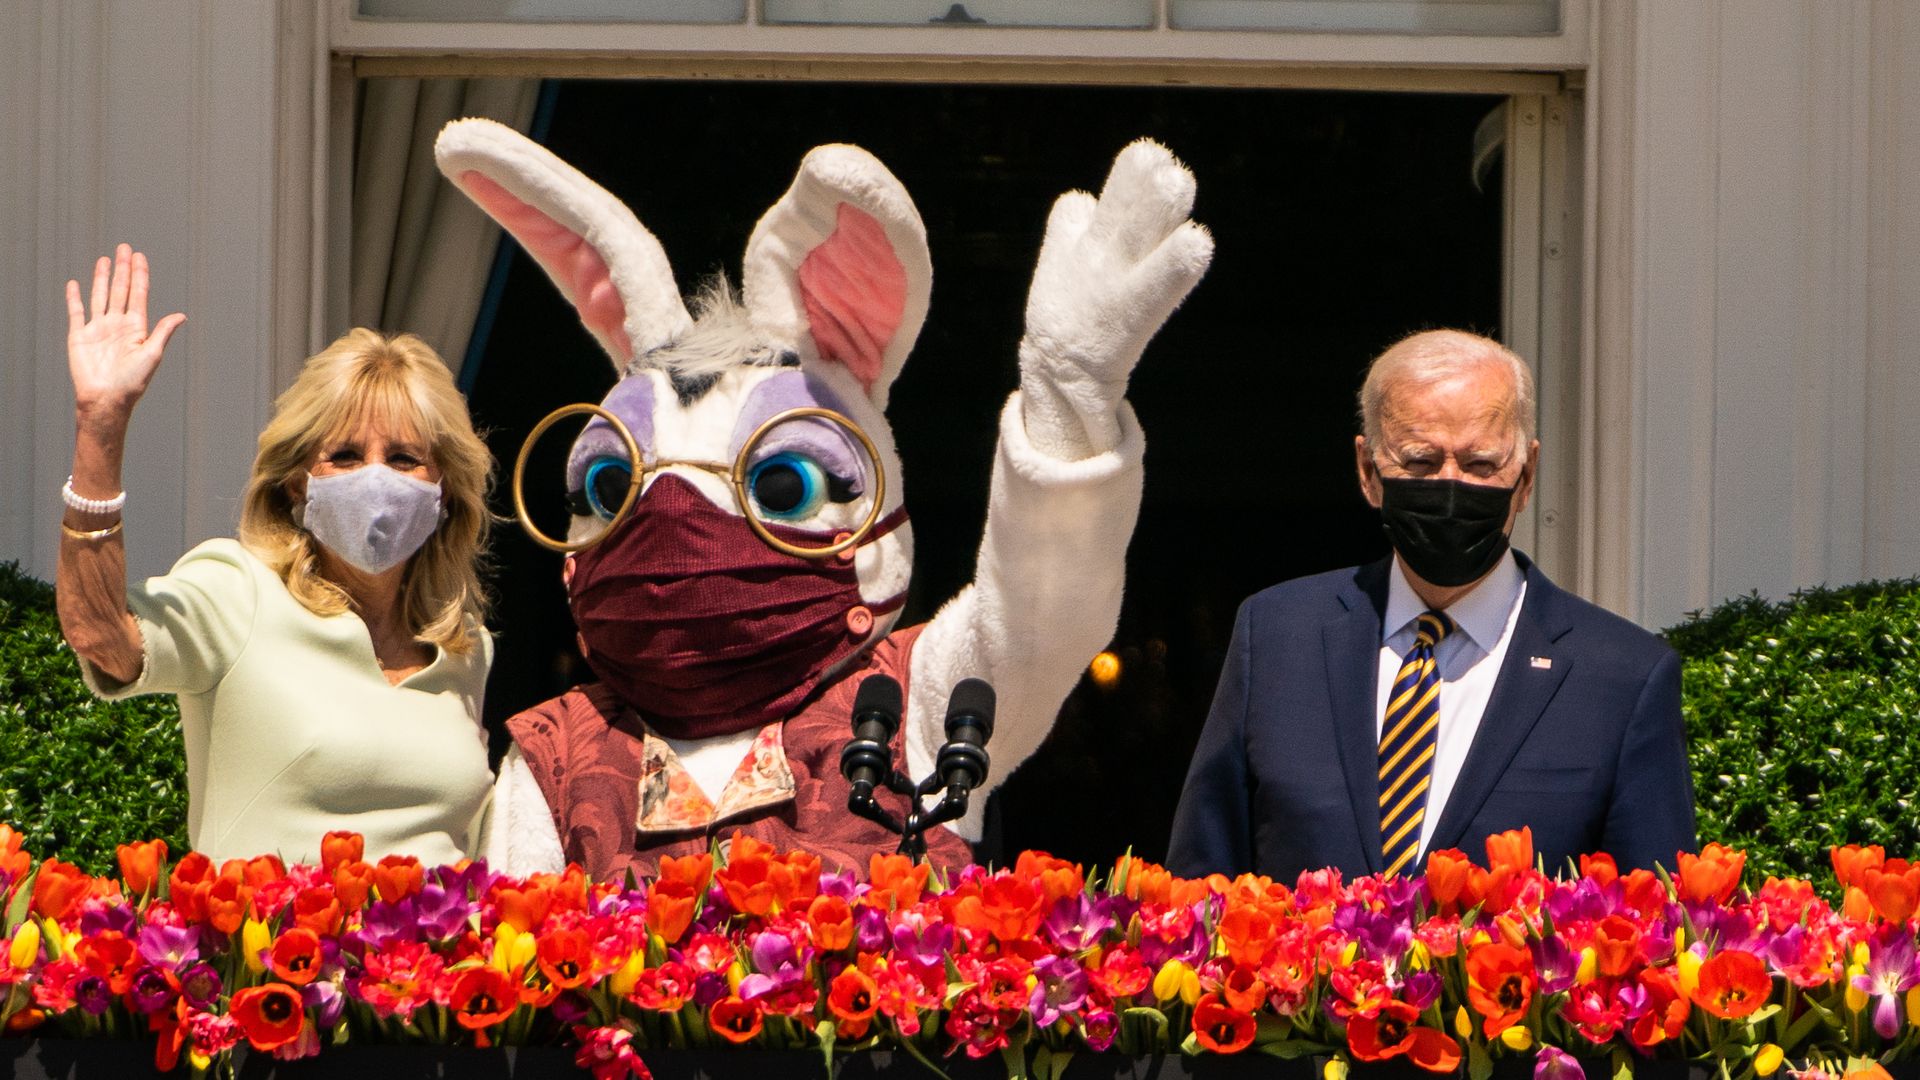  US President Joe Biden, First Lady Dr. Jill Biden, and the Easter Bunny during remarks about the tradition of Easter at the White House on April 5, 2021.